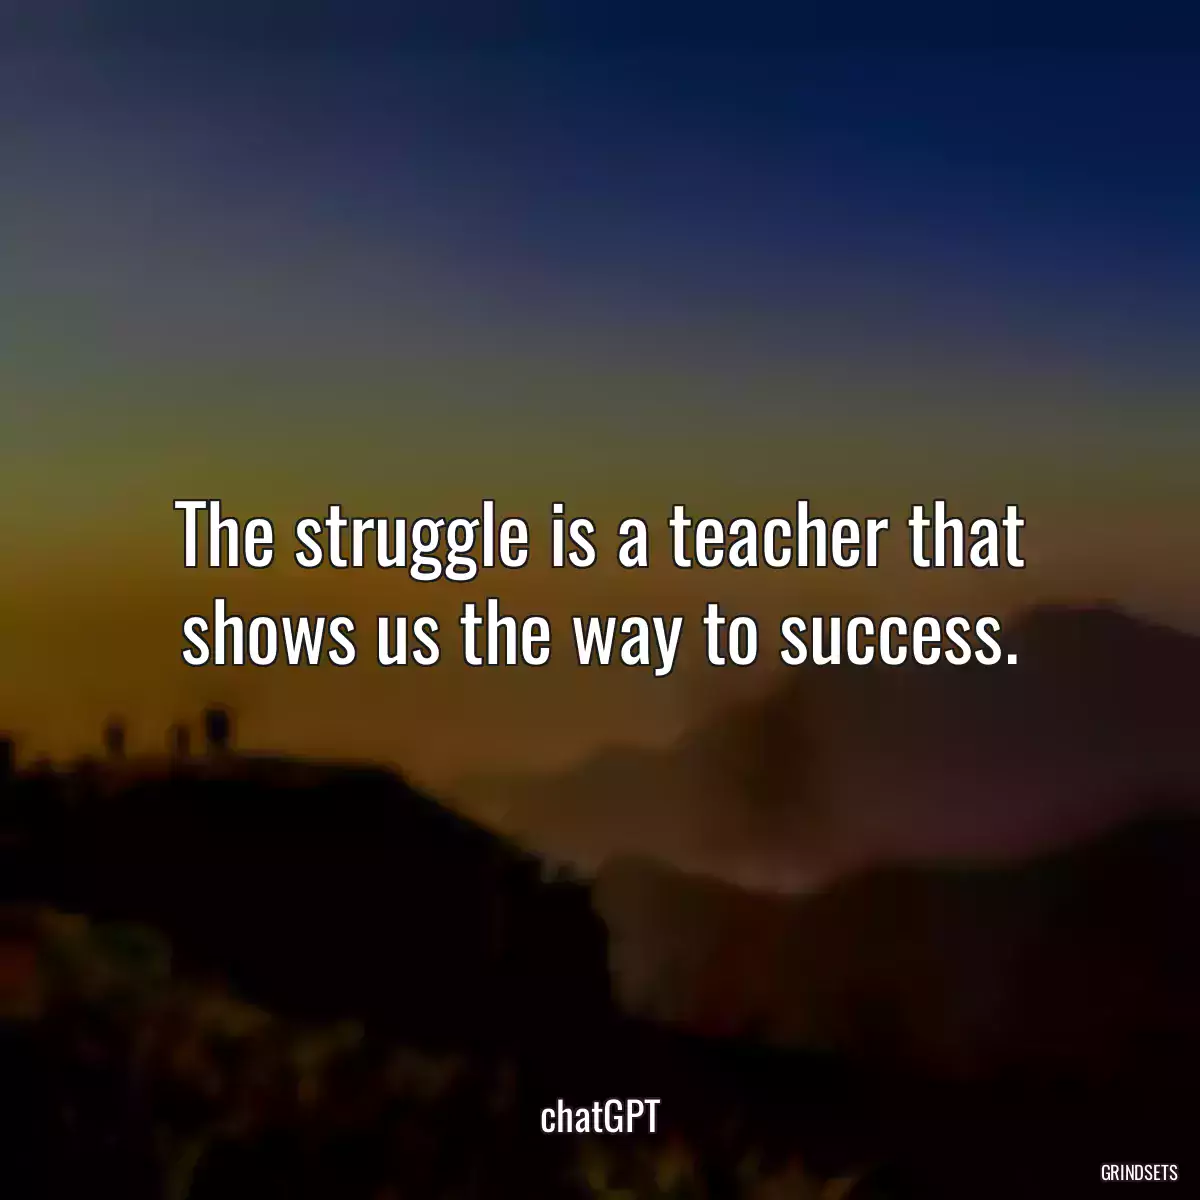 The struggle is a teacher that shows us the way to success.